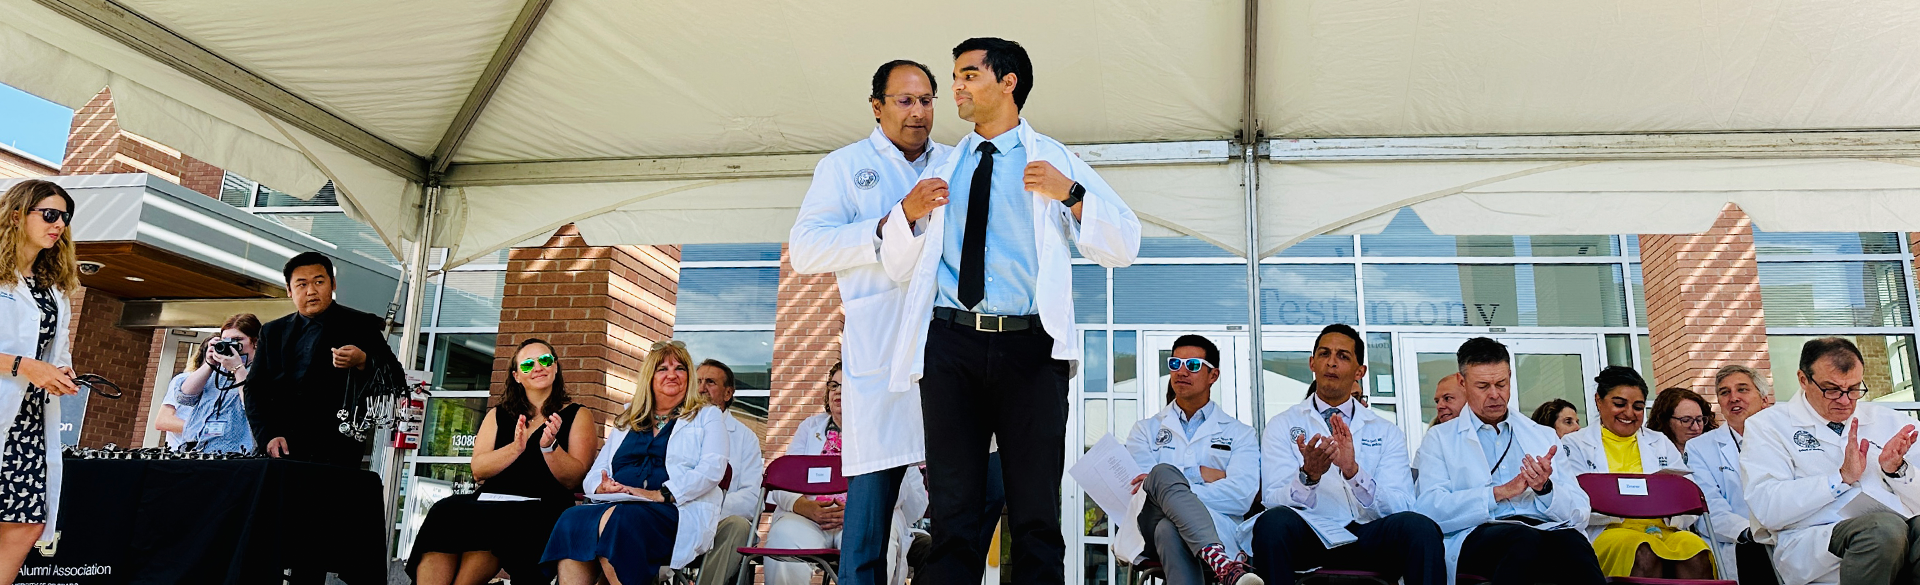 A member of the Class of 2027 receives their white coat